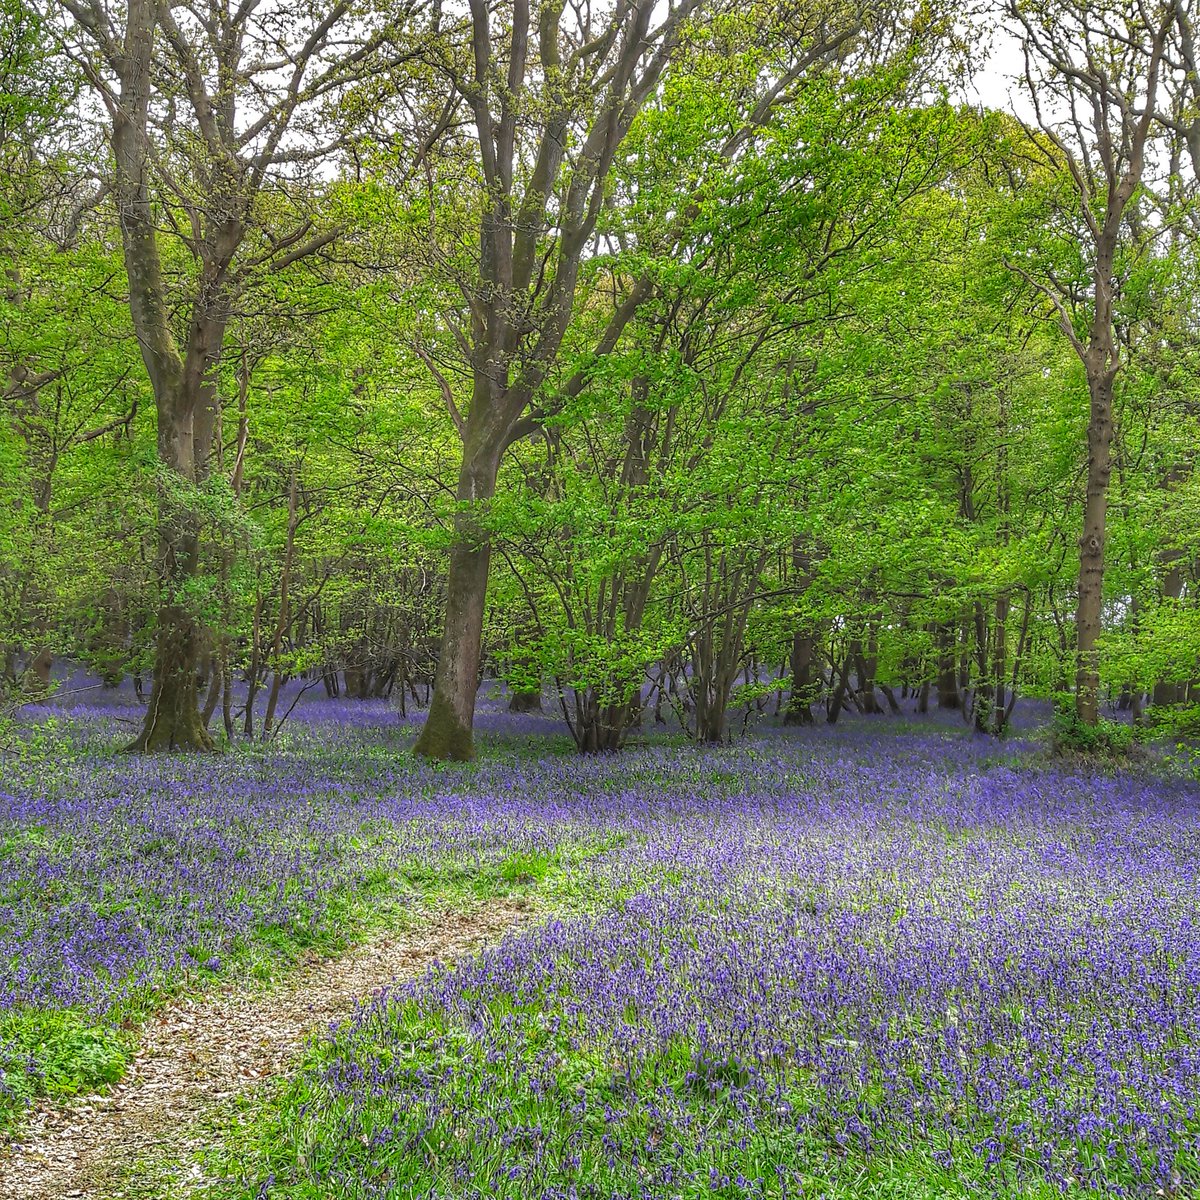 @WildlifeTrusts Bluebells from last year as Arlington Bluebell Walk is sadly closed at the moment. Happy #EarthDay @bluebellwalk